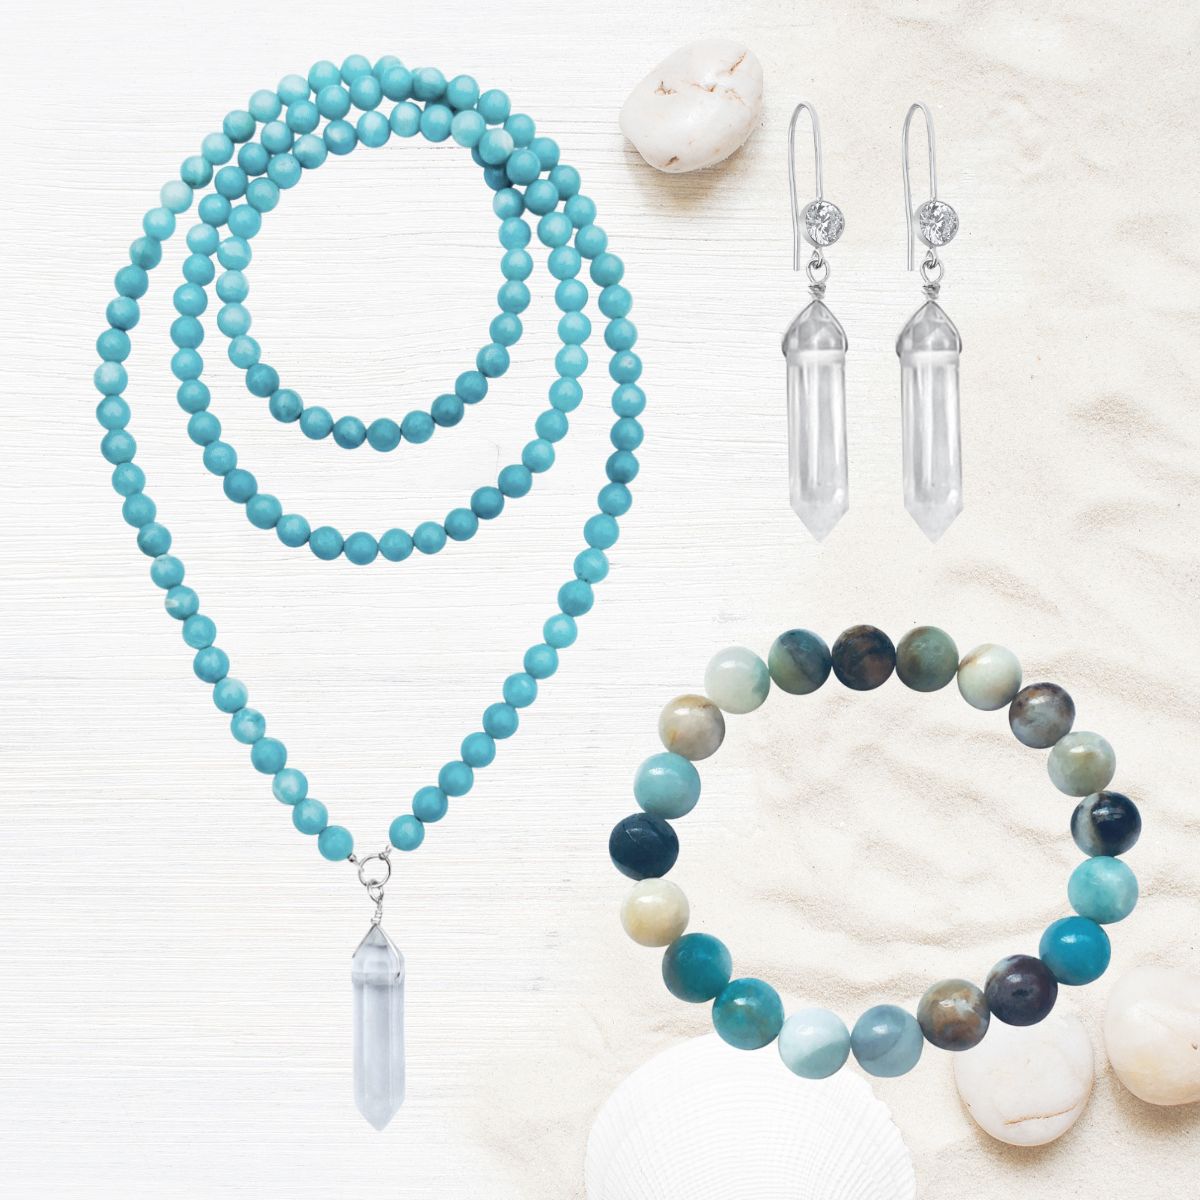 Wearing the Intuition Infusion Amazonite and Crystal Jewelry Set is a beautiful way to show your commitment to your spiritual journey, while also making a fashion statement.